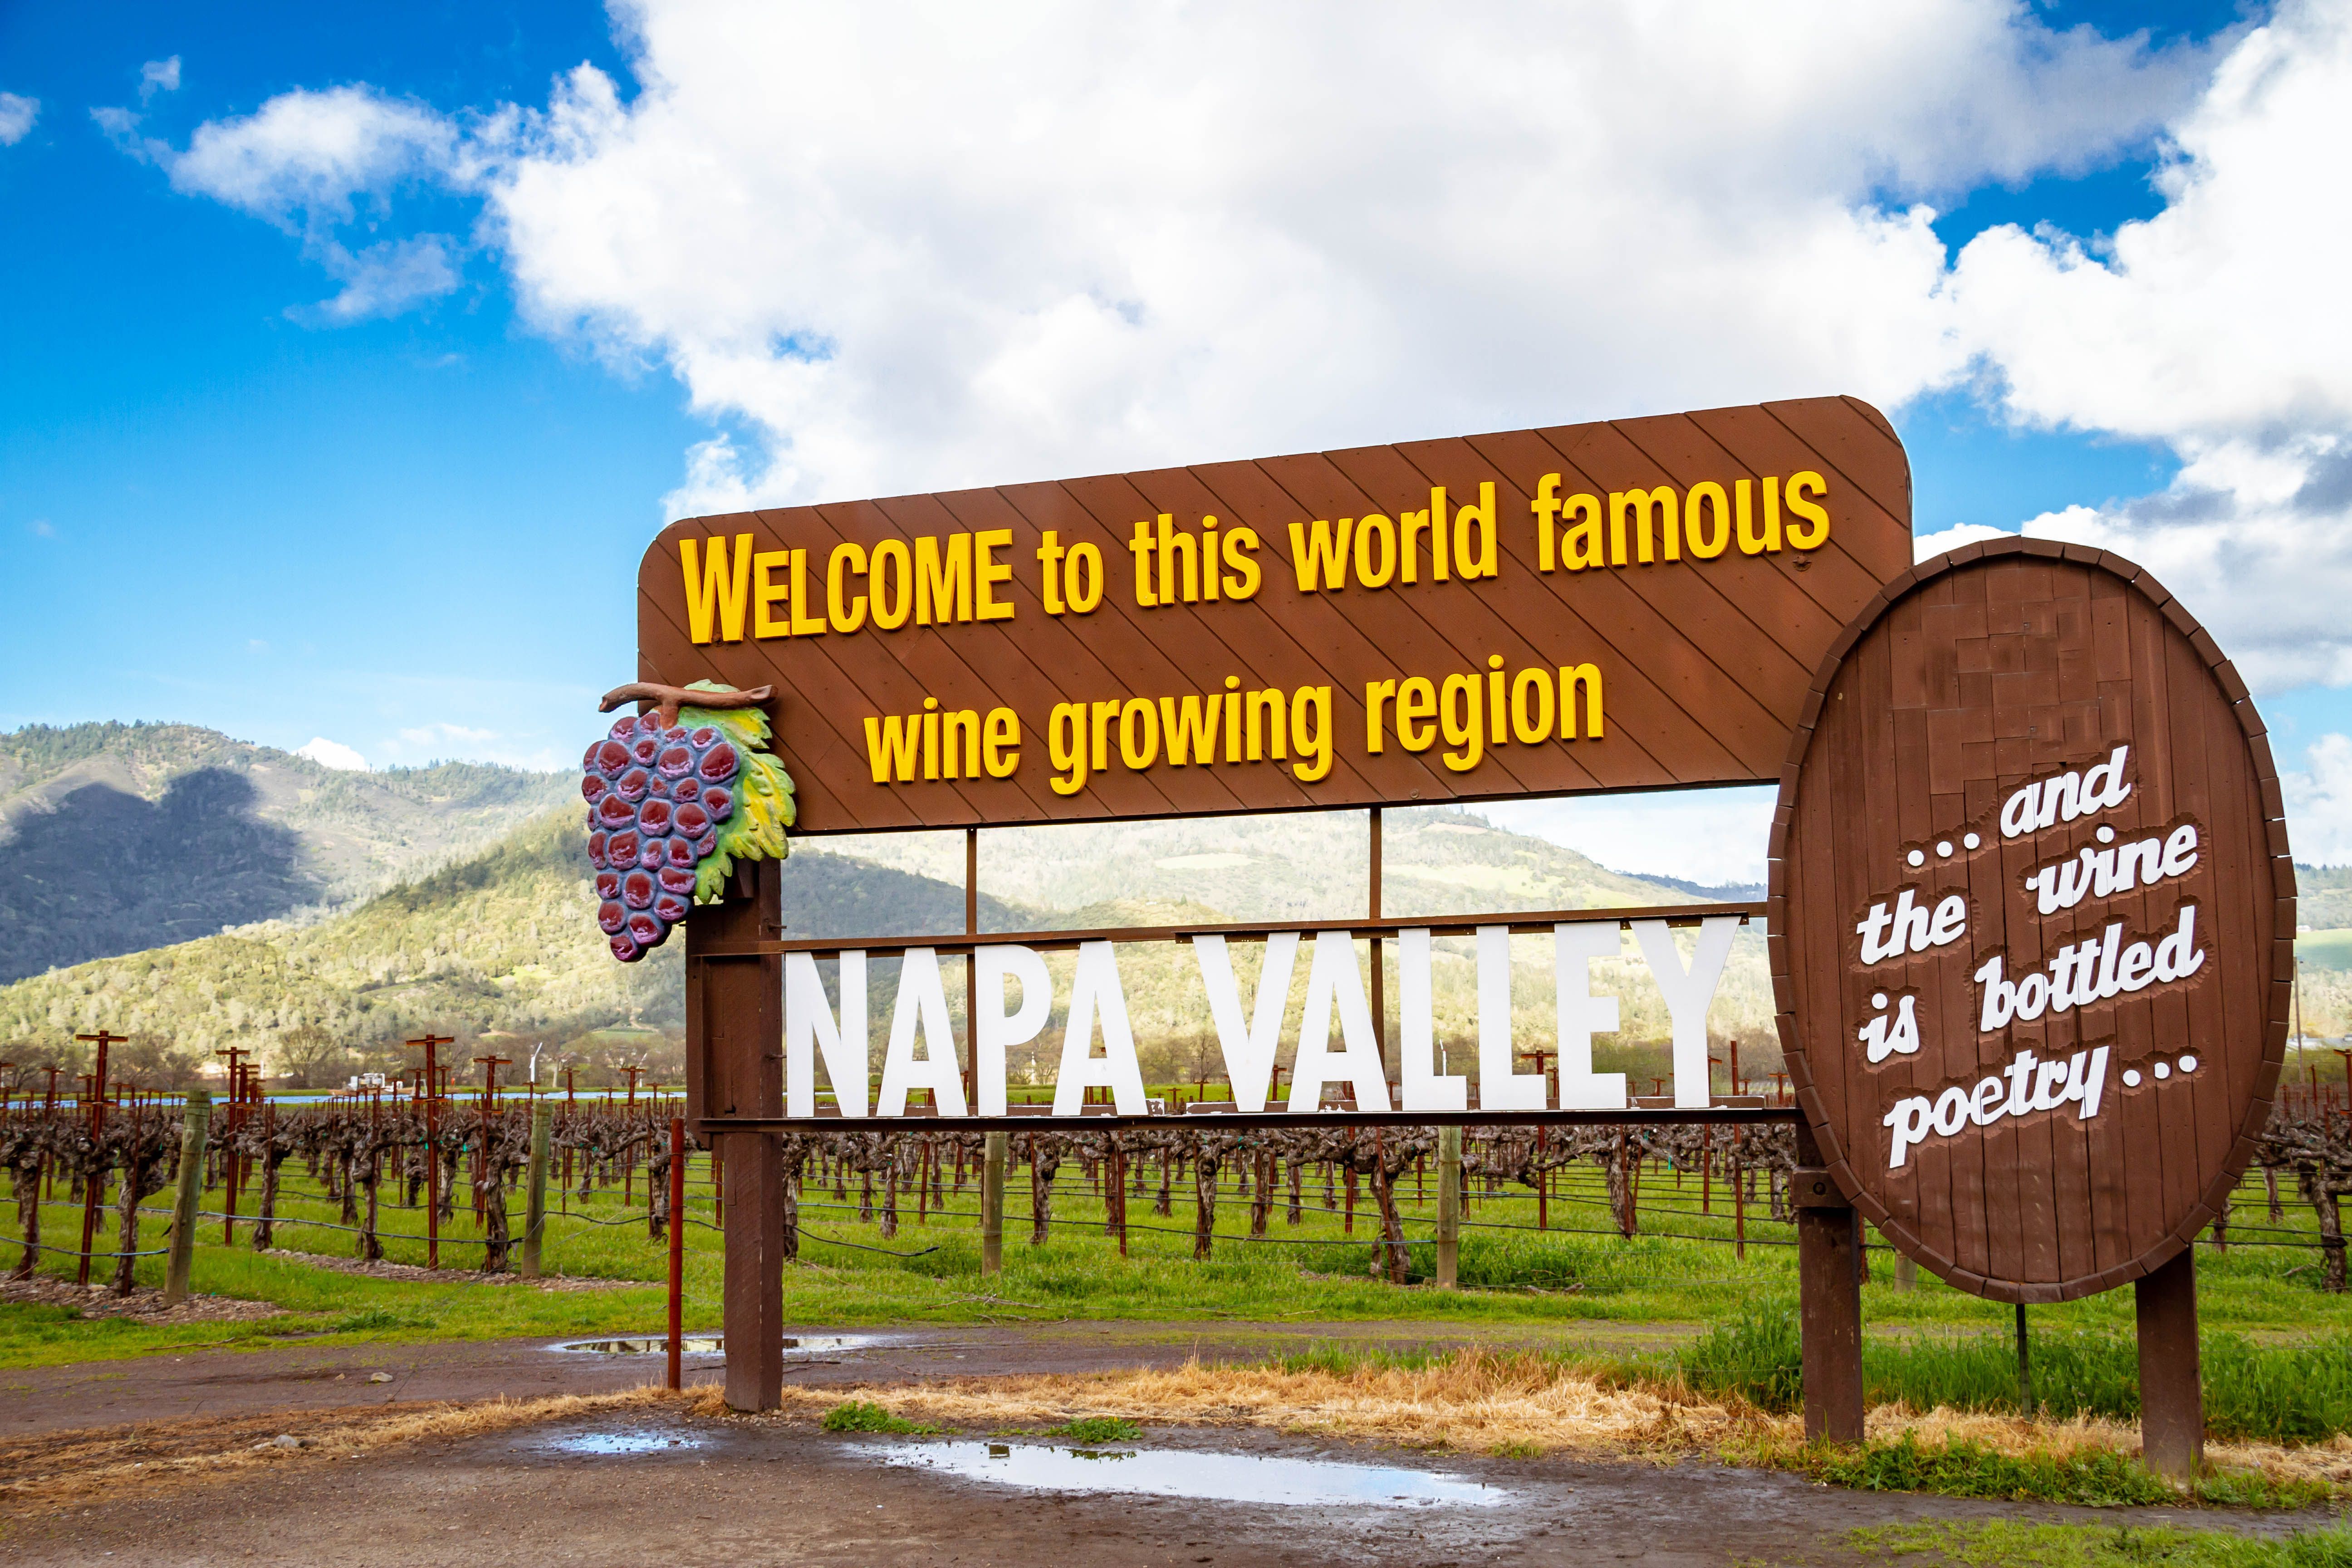 Napa Valley wine growing region welcome sign